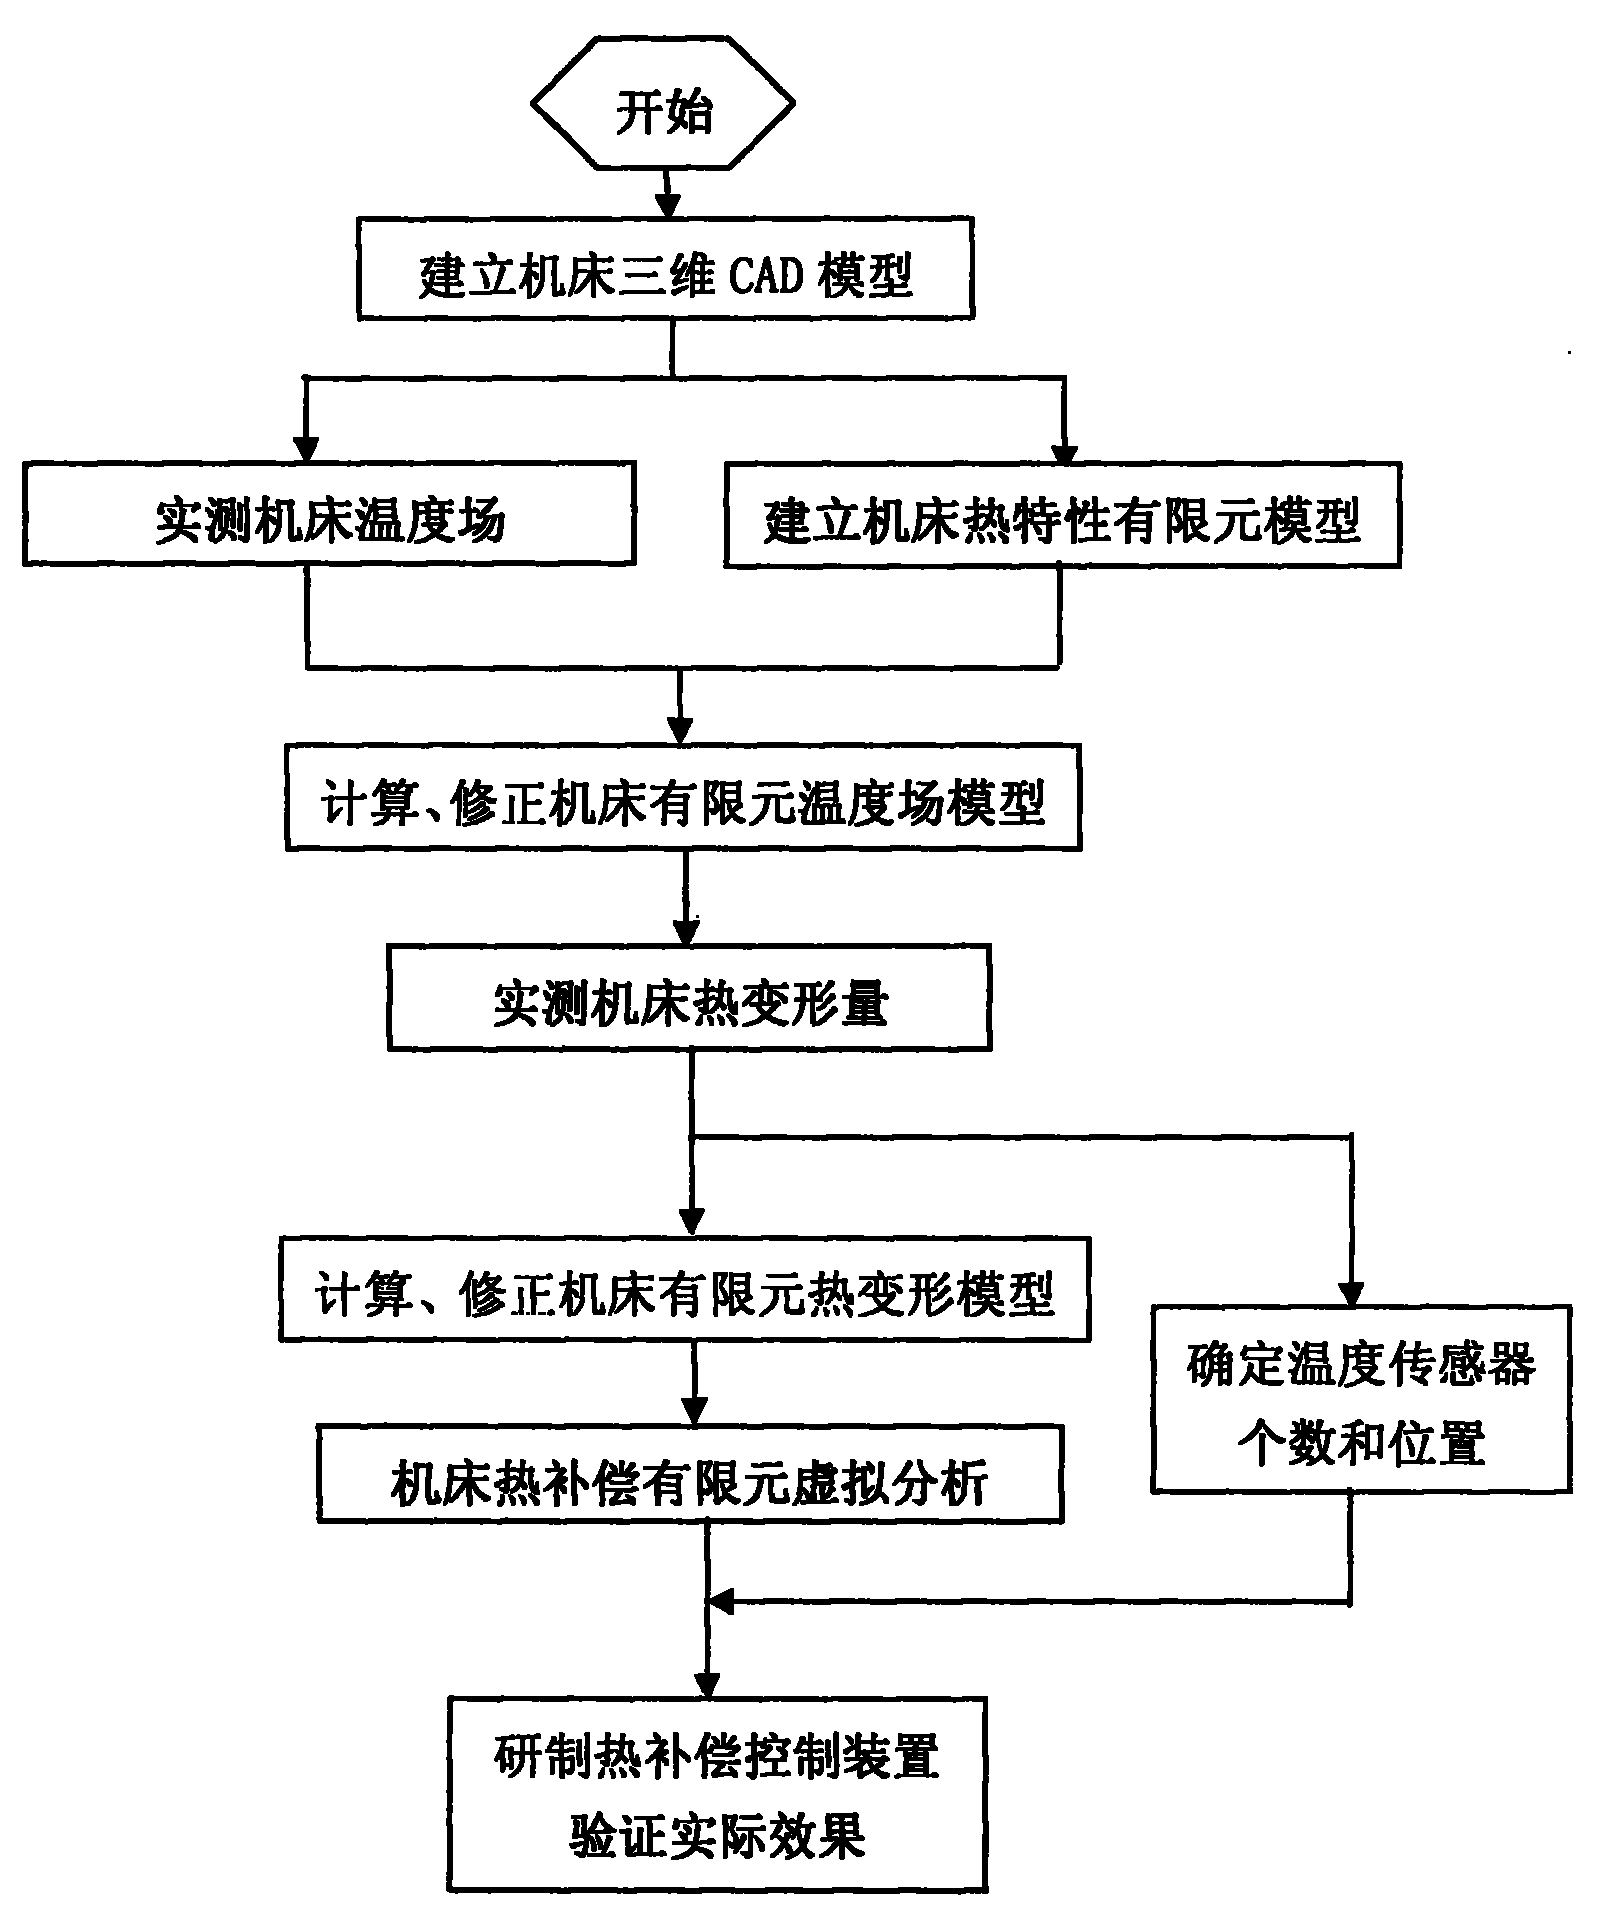 Implementation method of automatic compensation for thermal deformation of machine tool